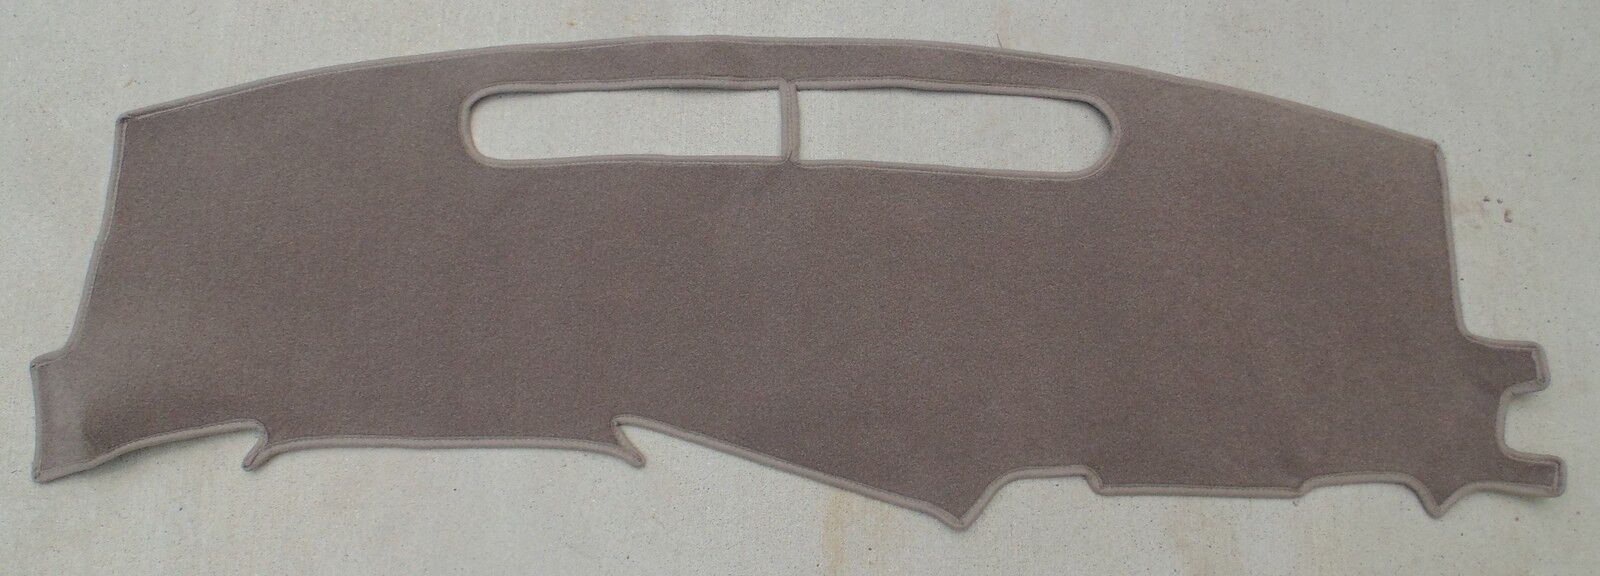 1998-2005 Chevrolet S10 Pickup truck dash cover mat dashboard pad taupe